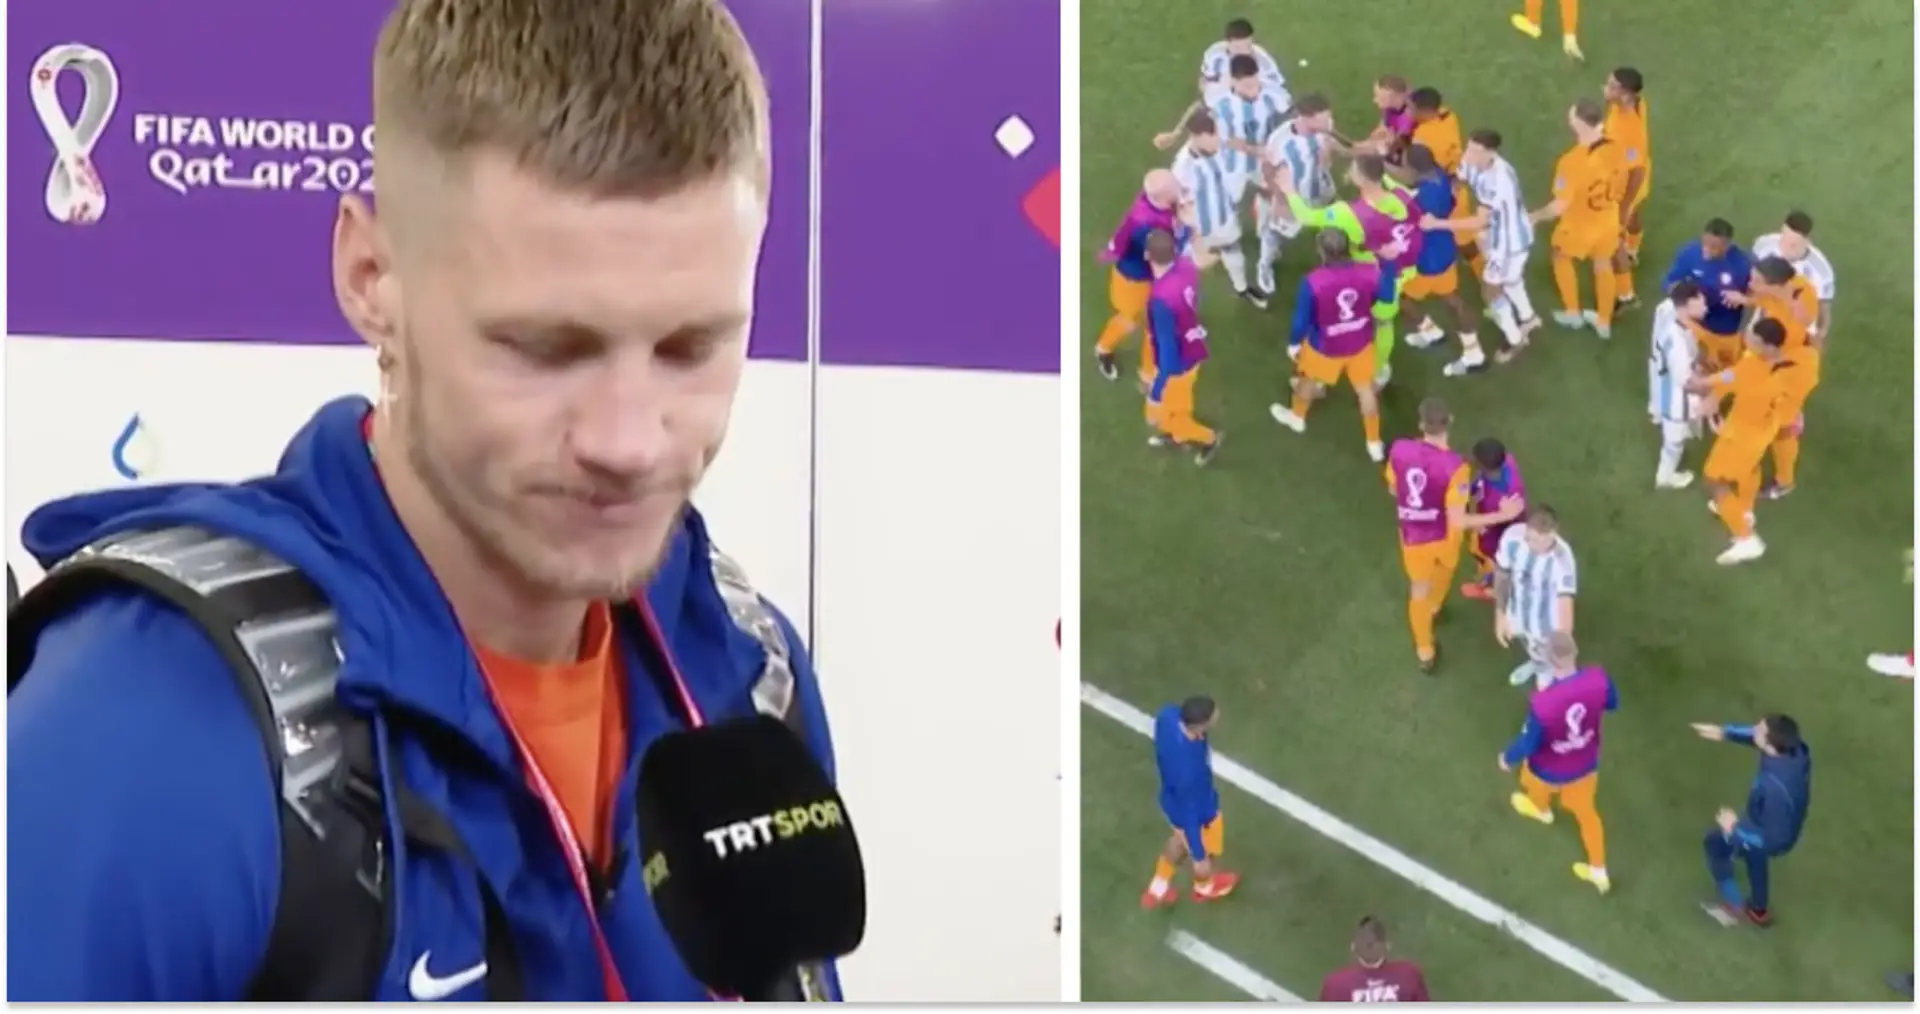 'Trying to play victim': Weghorst says Messi 'was rude' to him, fan slams Dutch in response 